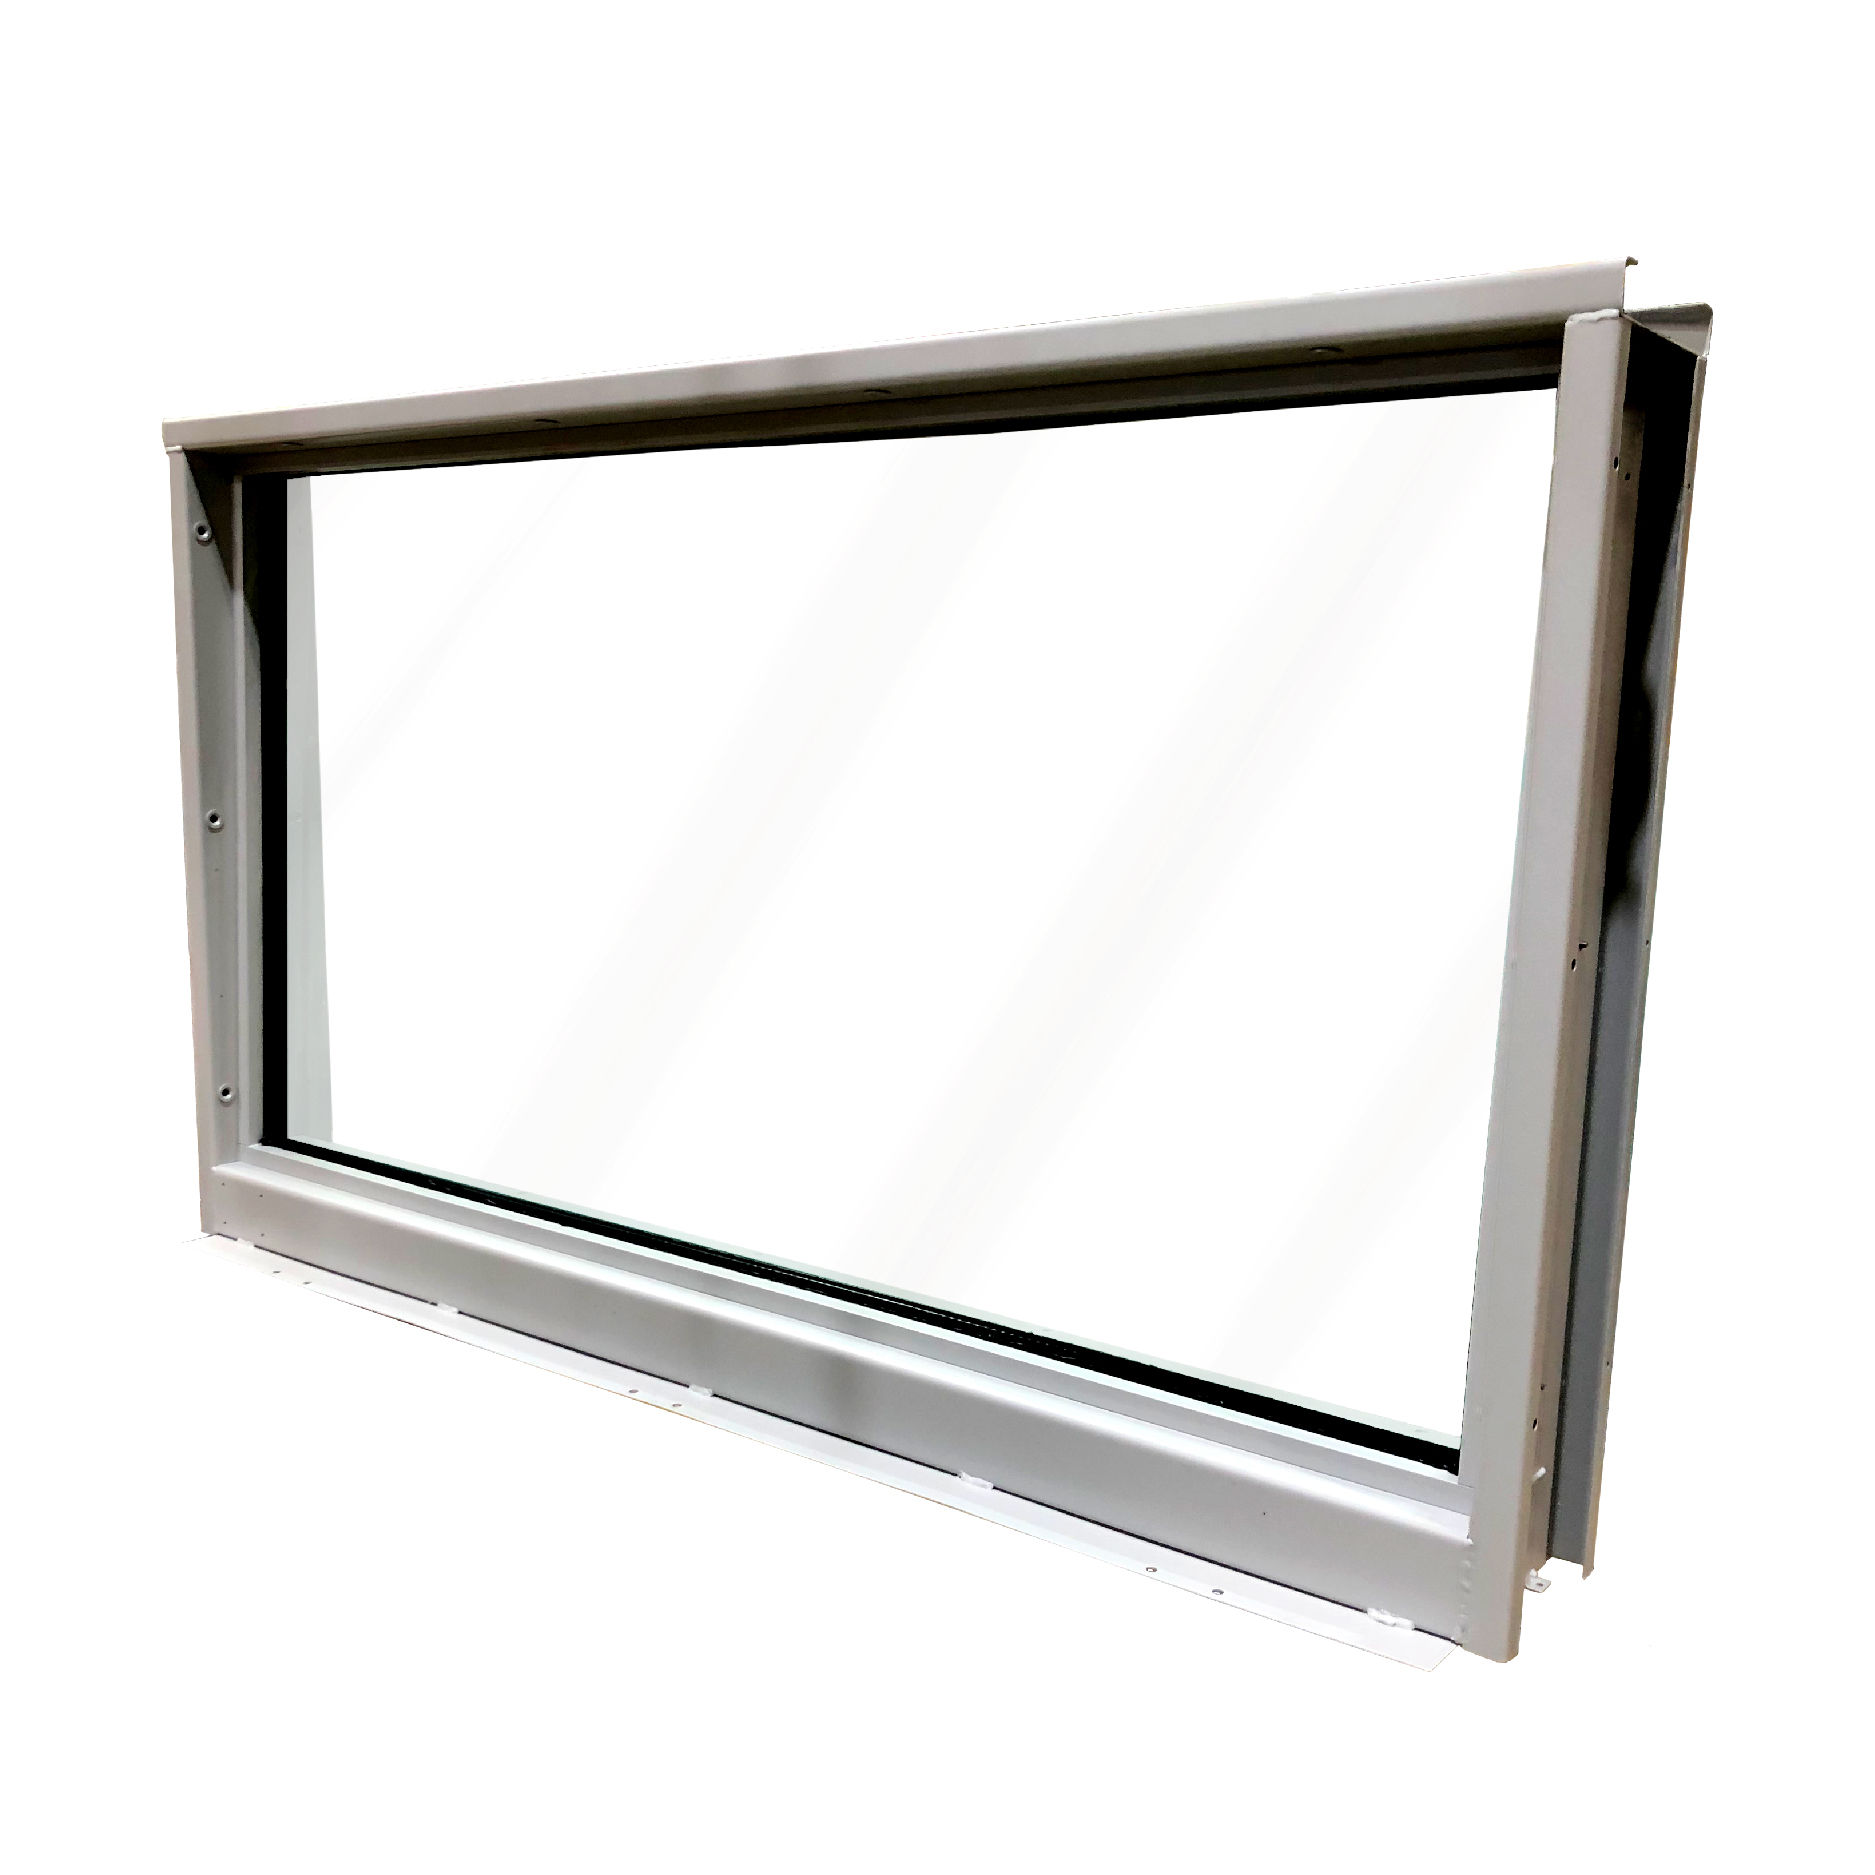 Picture for category 56x33 Hurricane HVHZ Security Window - 12103995